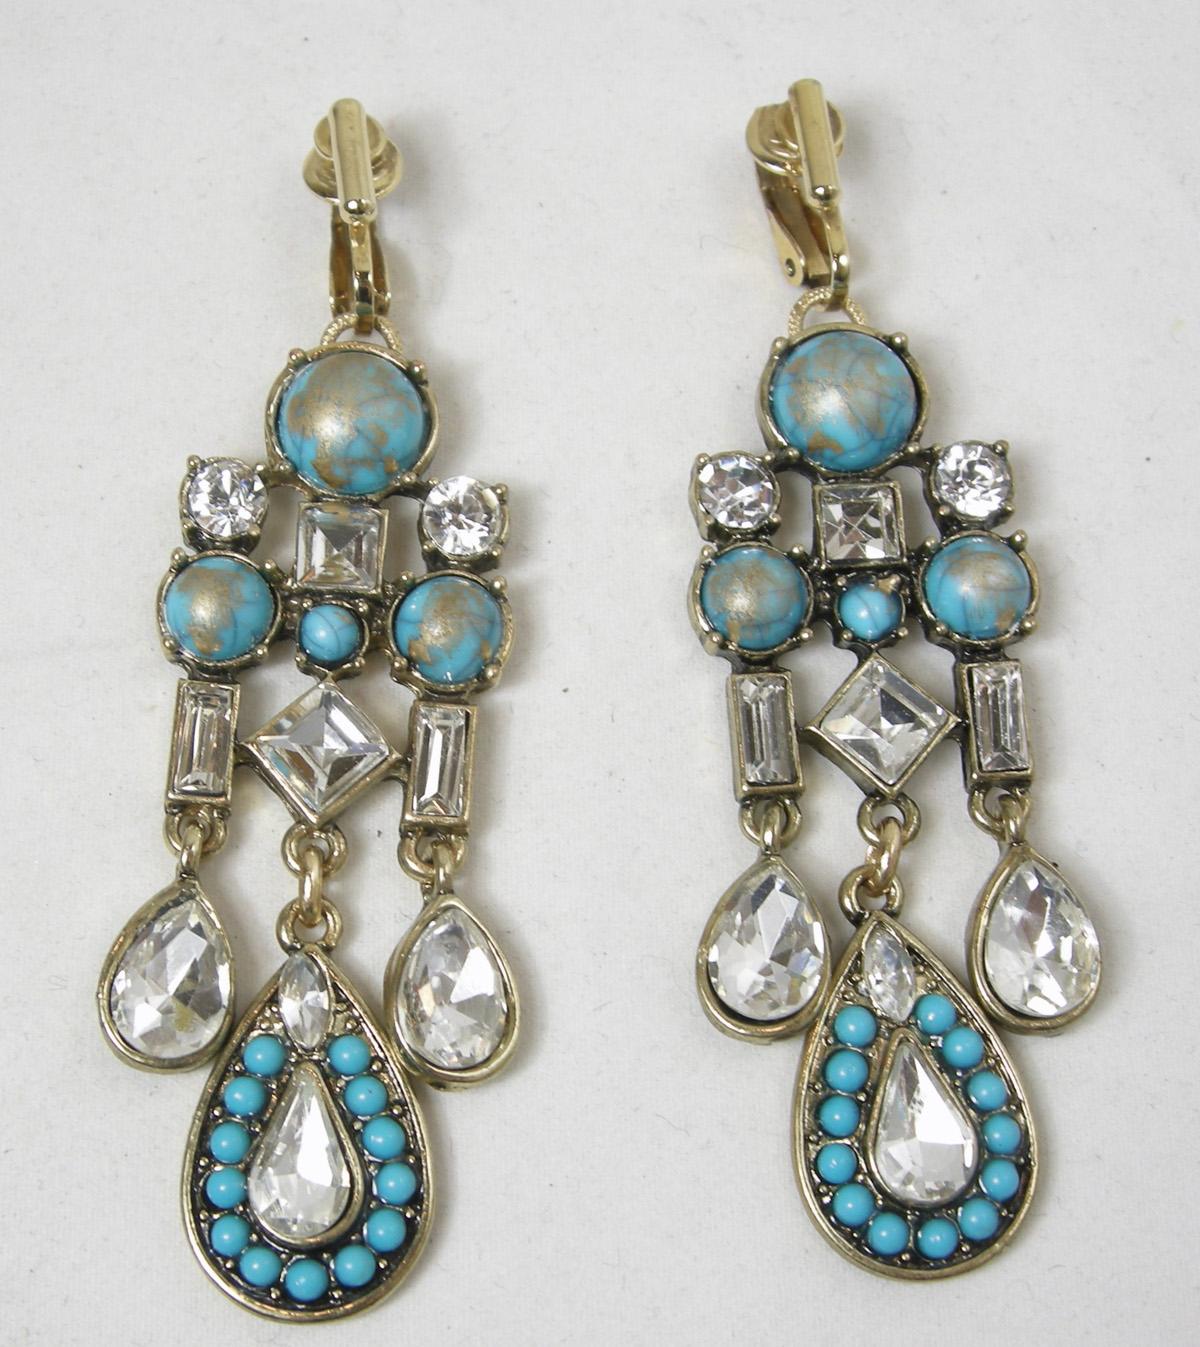 These vintage faux turquoise dangling earrings have a mixture of turquoise and gold enamel top with rhinestone accents.  Rhinestone baguettes hang from the sides with a teardrop rhinestone at the bottom.  The center has a tear drop shape with small